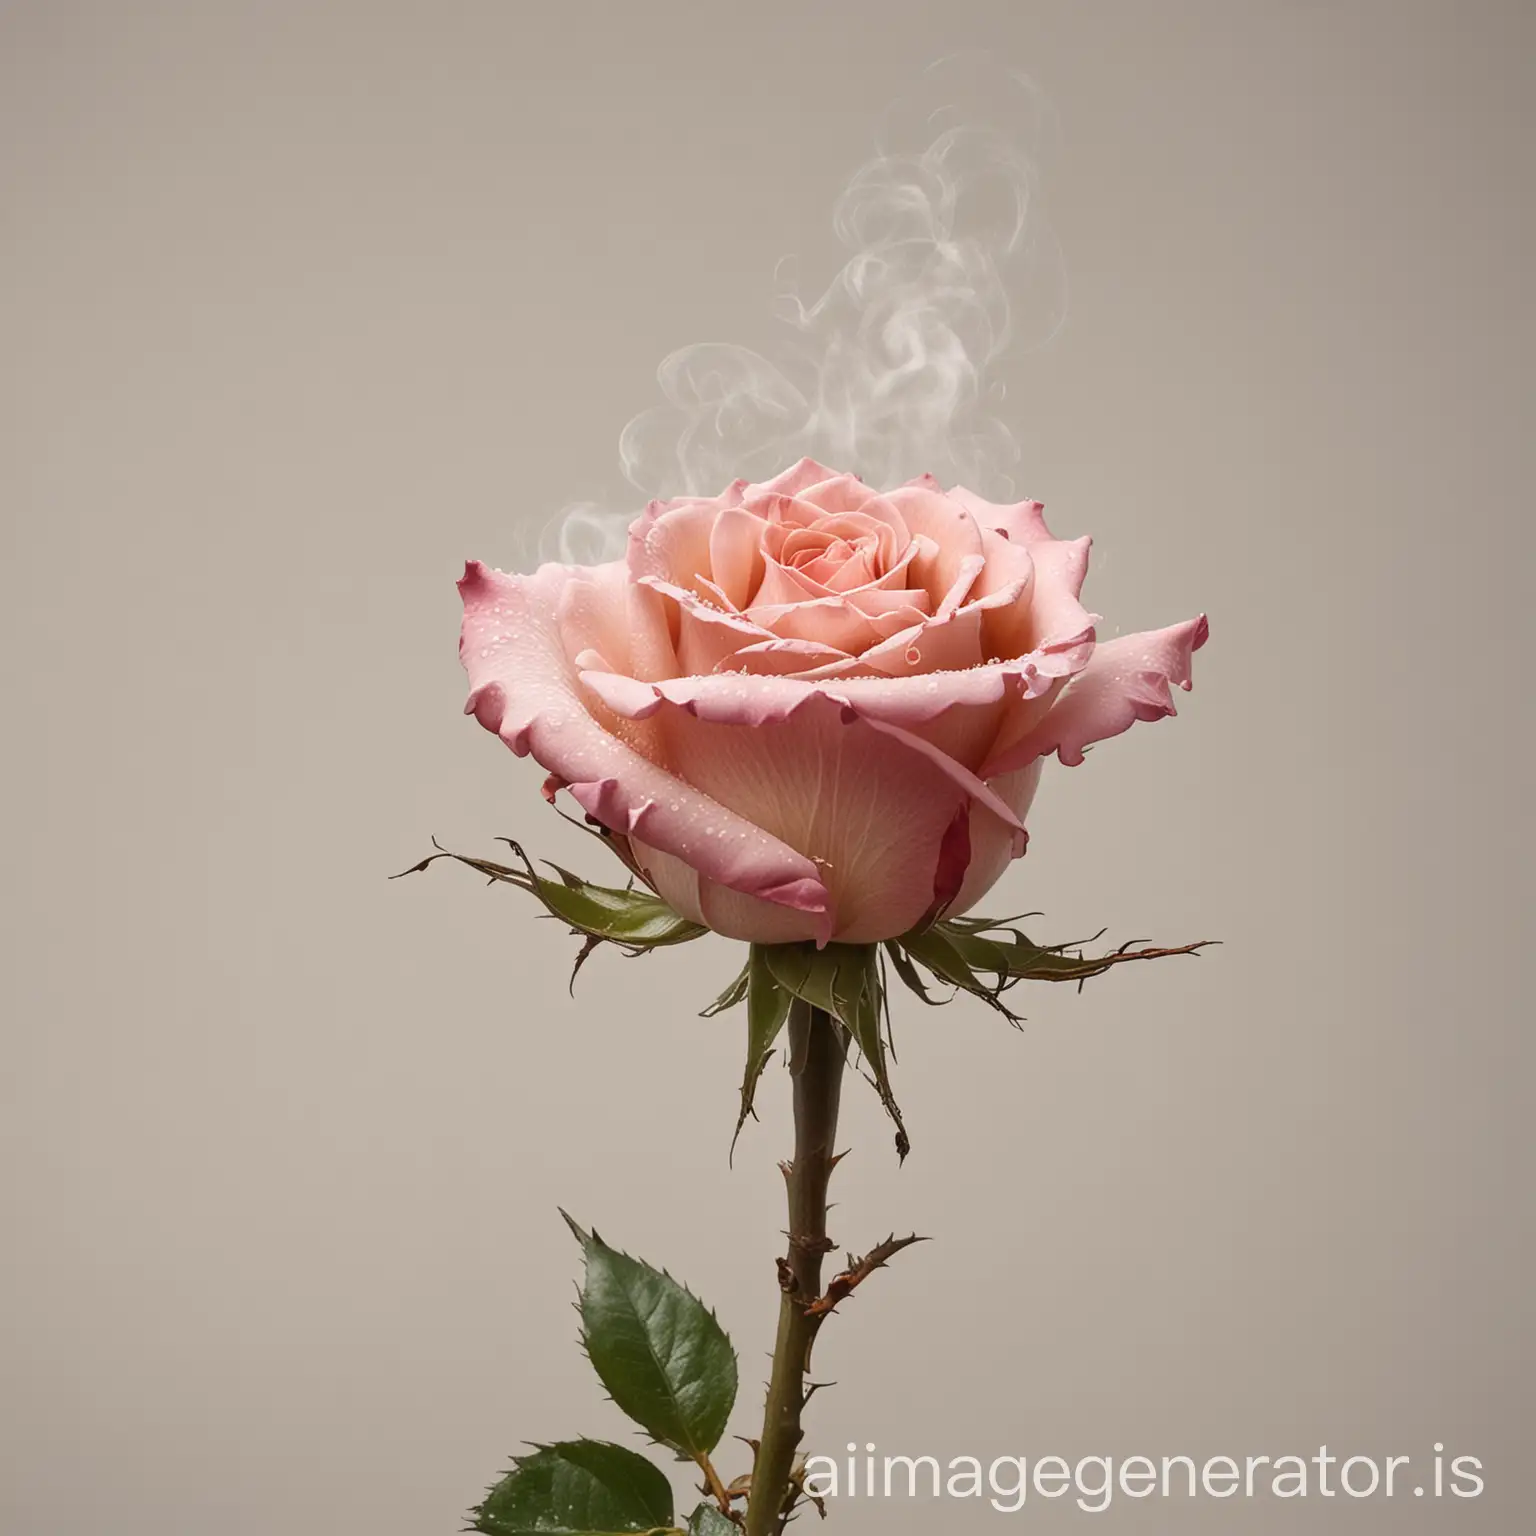 Vibrant-Rose-with-Steam-and-Thorns-on-Neutral-Background